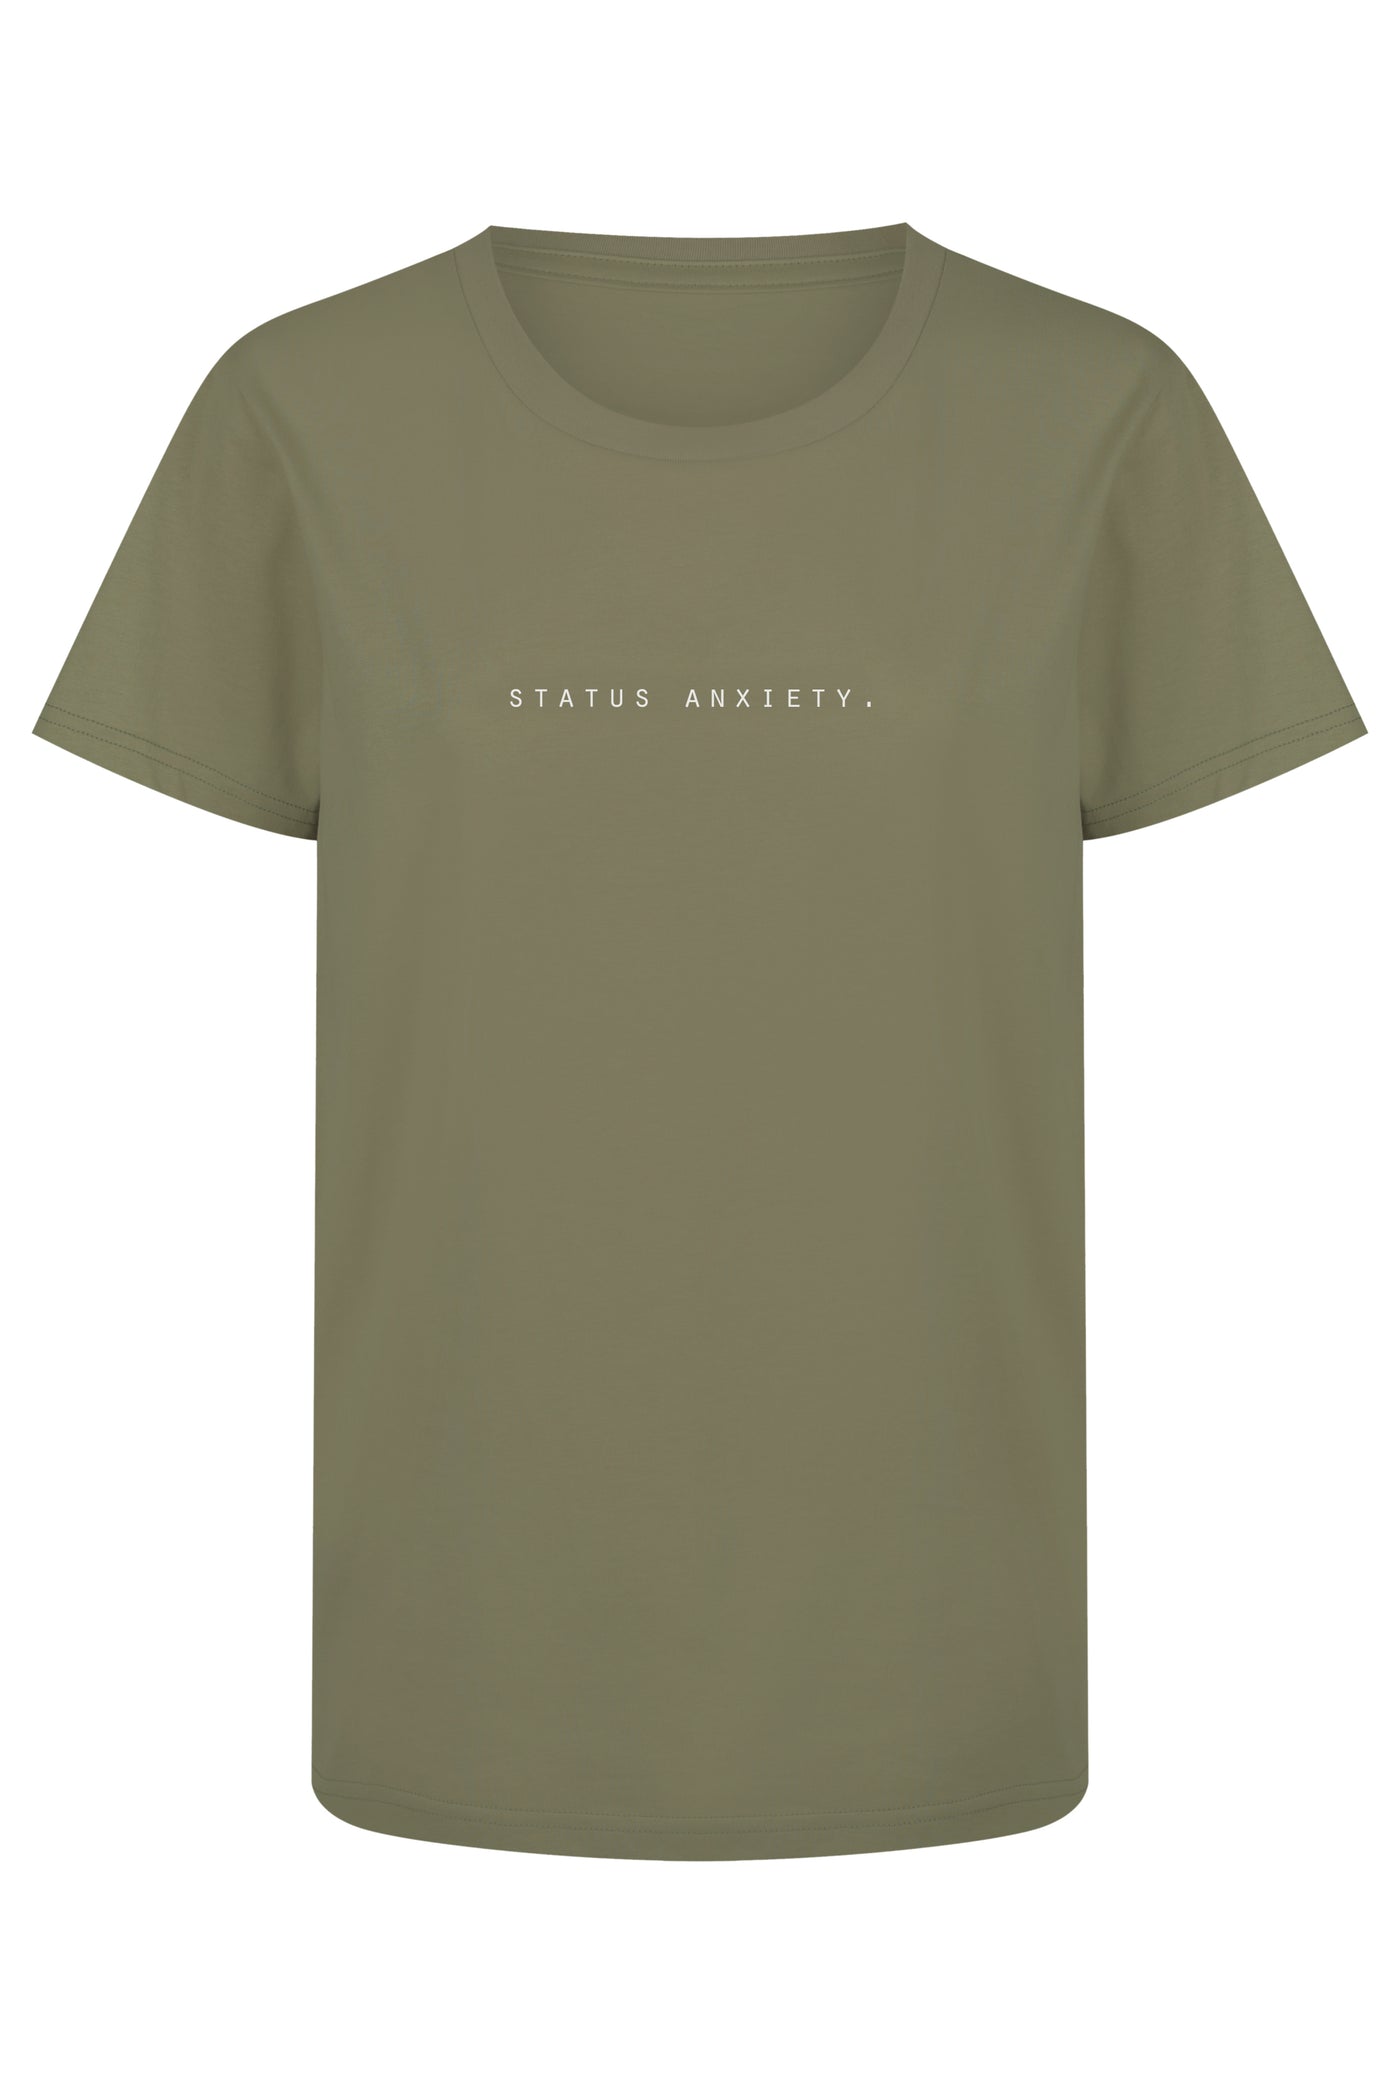 STATUS ANXIETY THINK IT OVER TEE  The Status Anxiety Think It Over Tee is an essential wardrobe staple no matter the season; wear it alone or layered. 